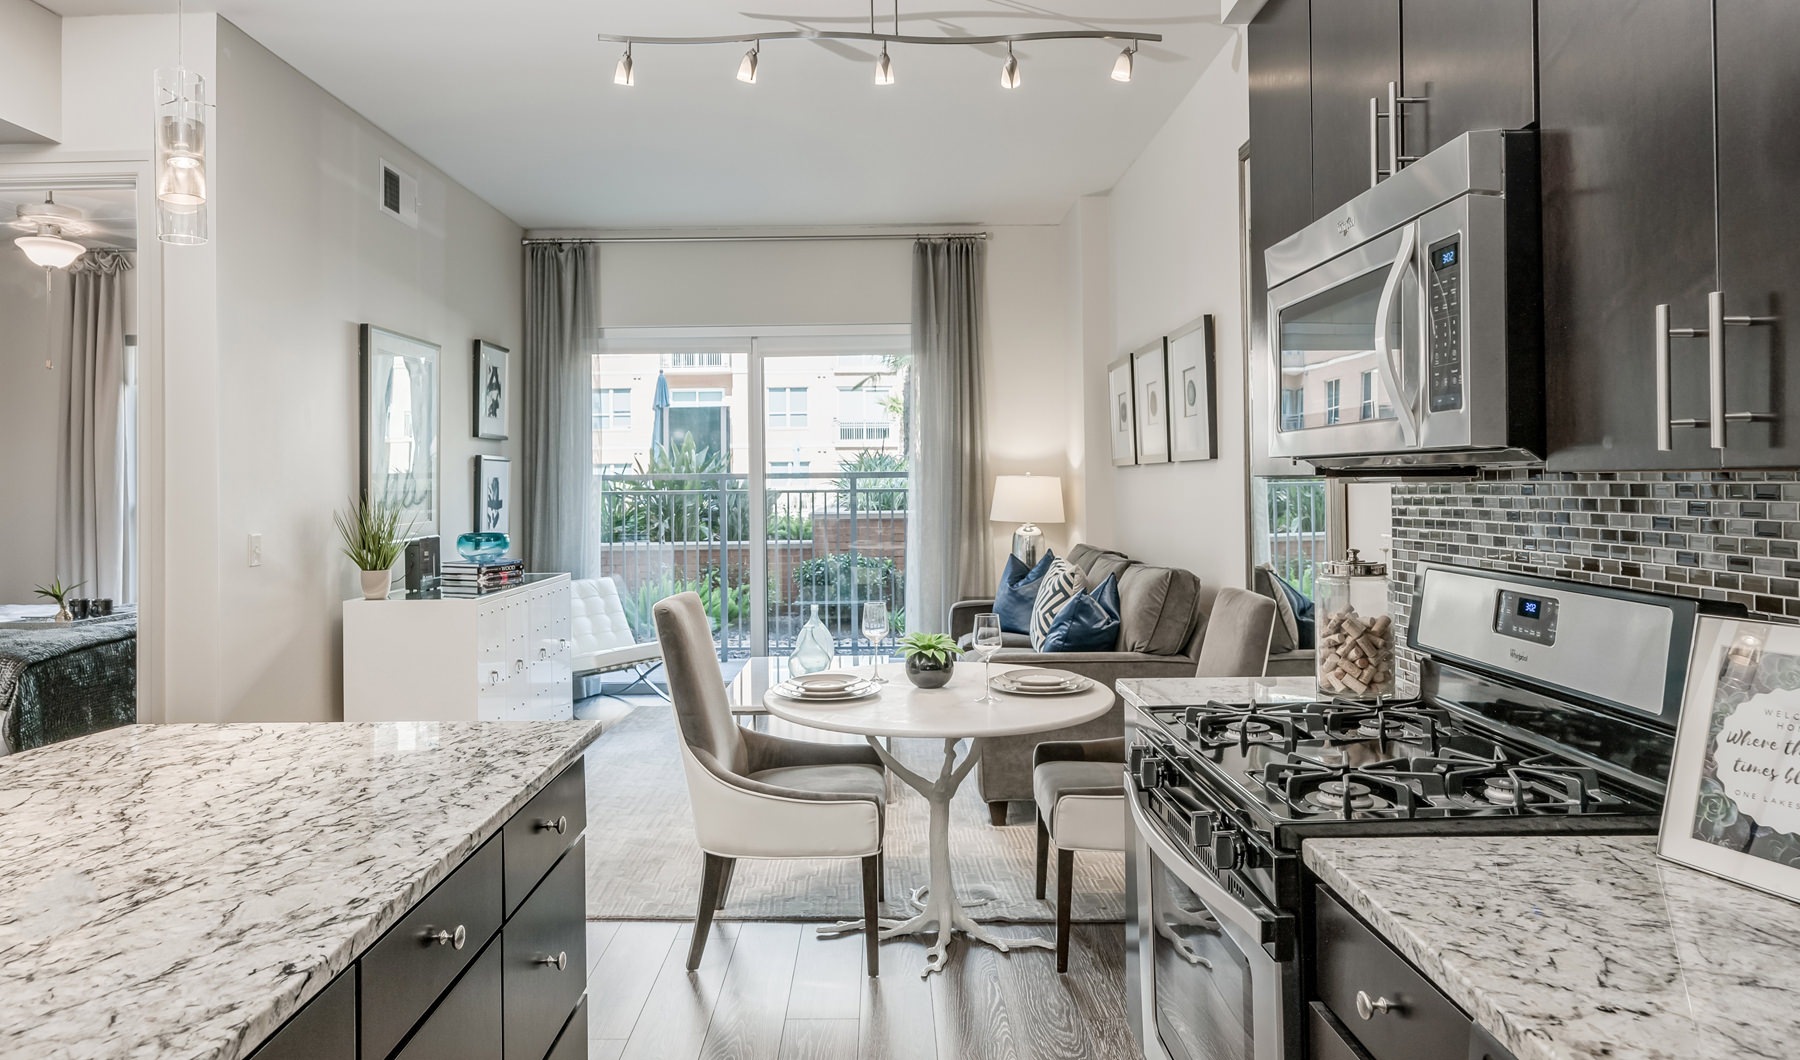 One Lakes Edge  Luxury Apartments in The Woodlands, Texas